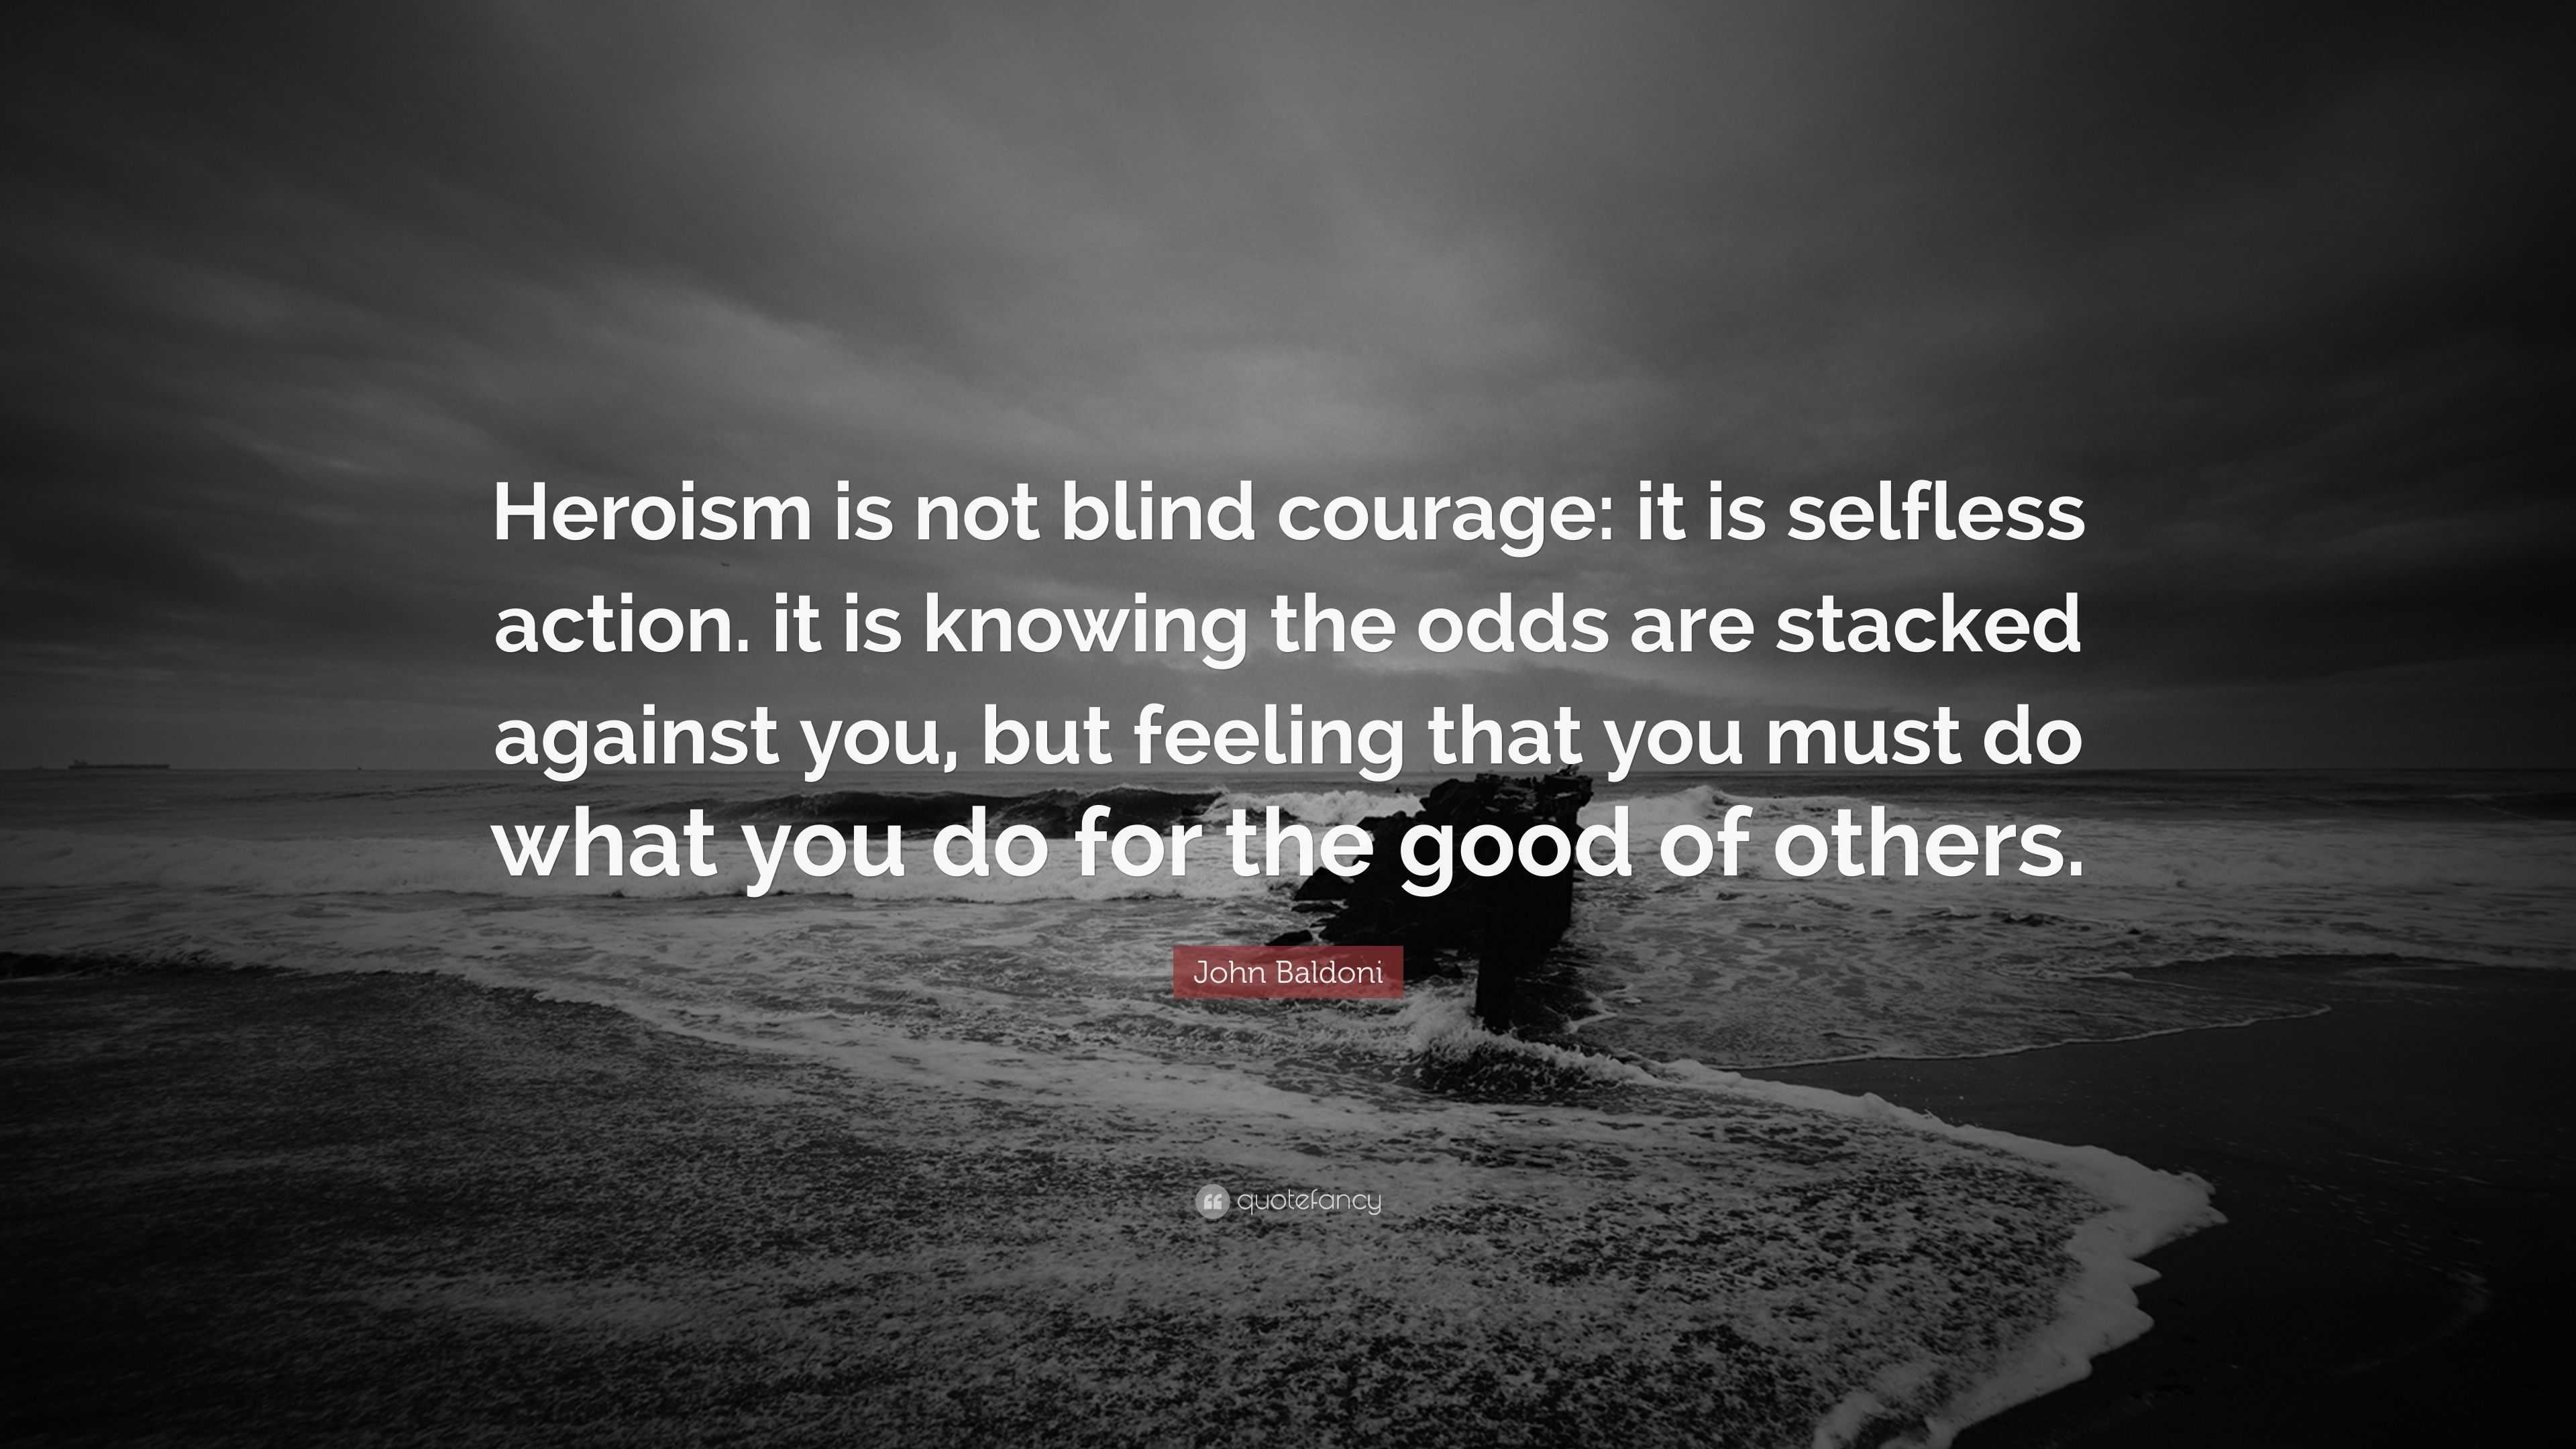 John Baldoni Quote: “Heroism is not blind courage: it is selfless ... Good Selfless Quotes